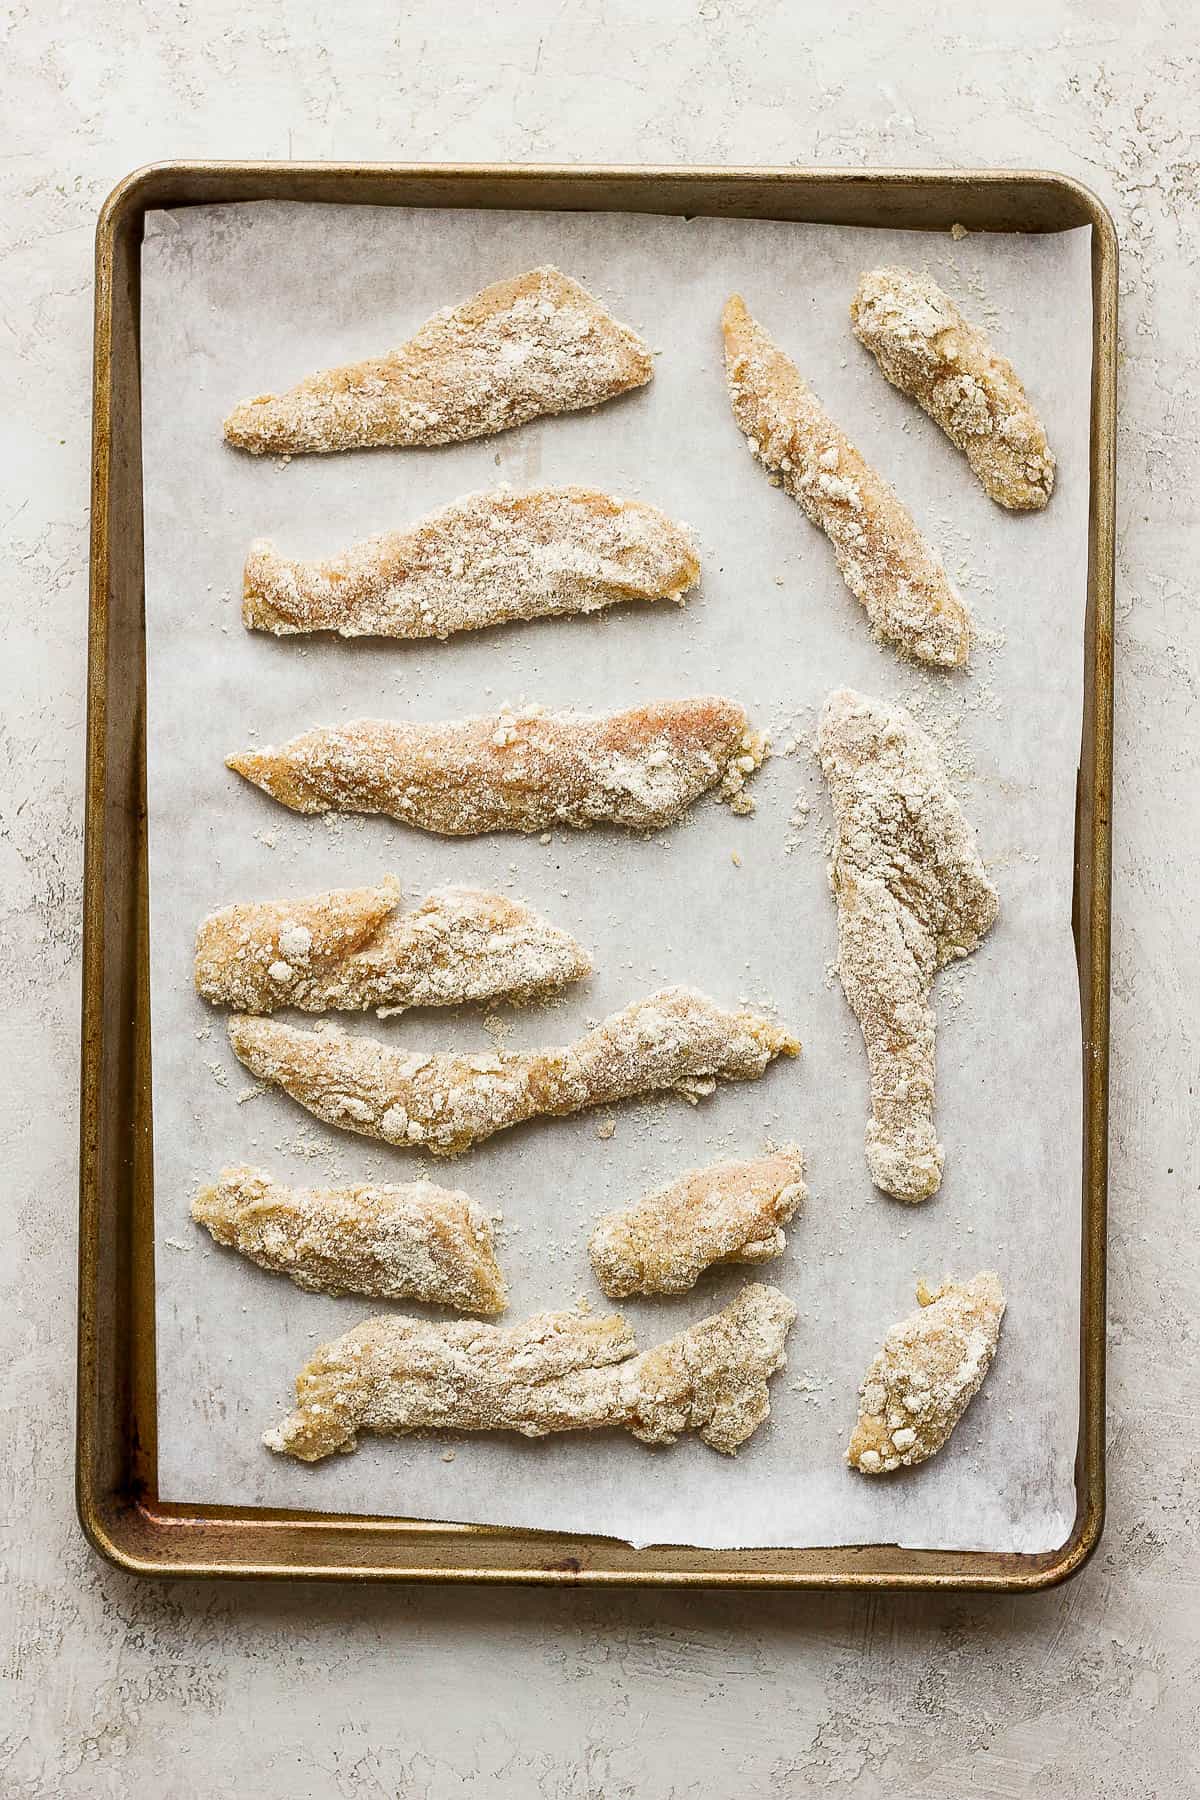 Chicken tenders on a parchment-lined baking sheet before baking.